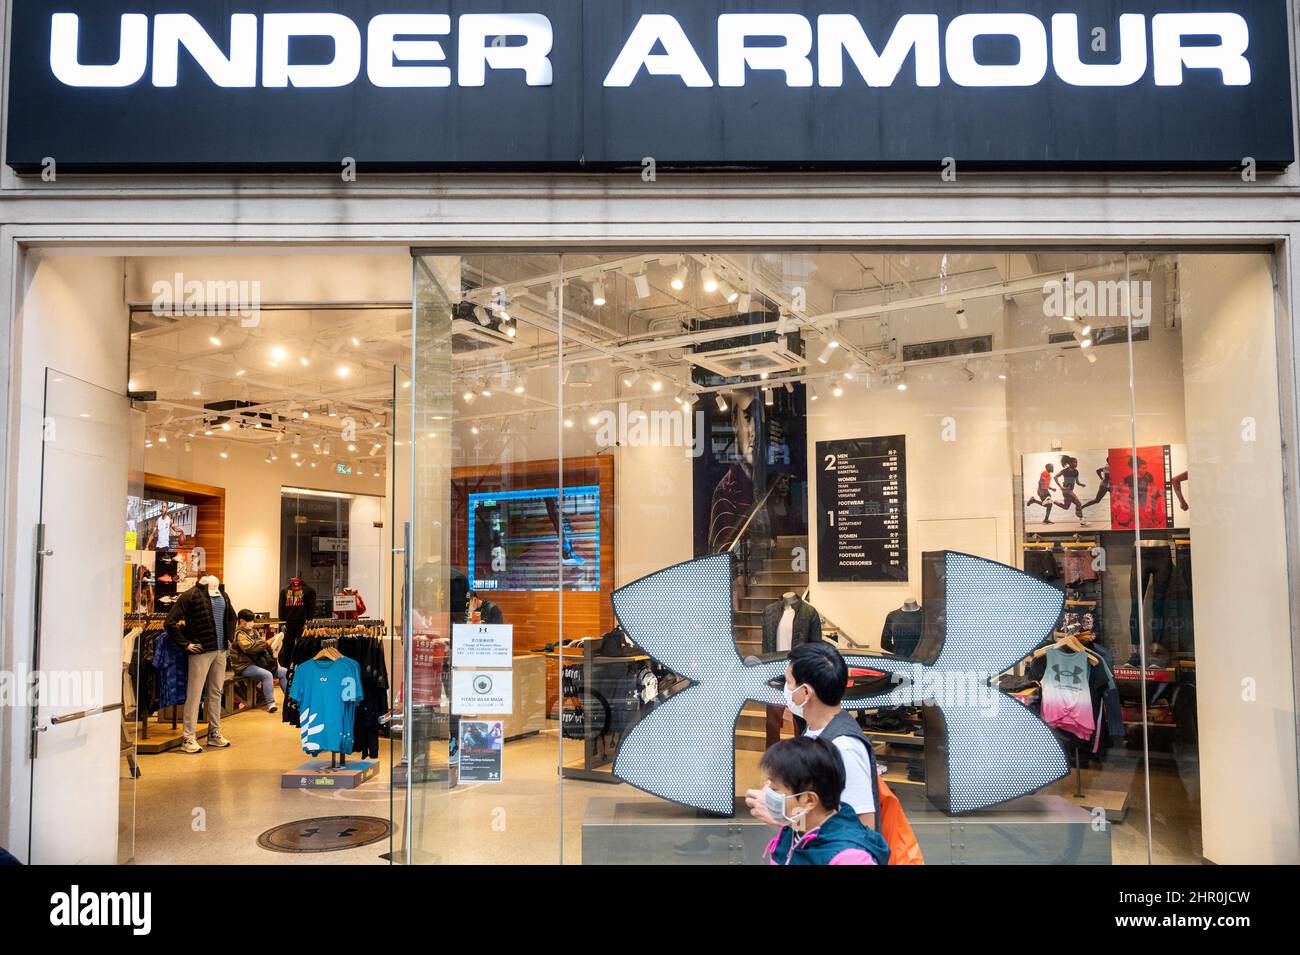 Under Armour Clothing High Resolution Stock Photography and Images - Alamy